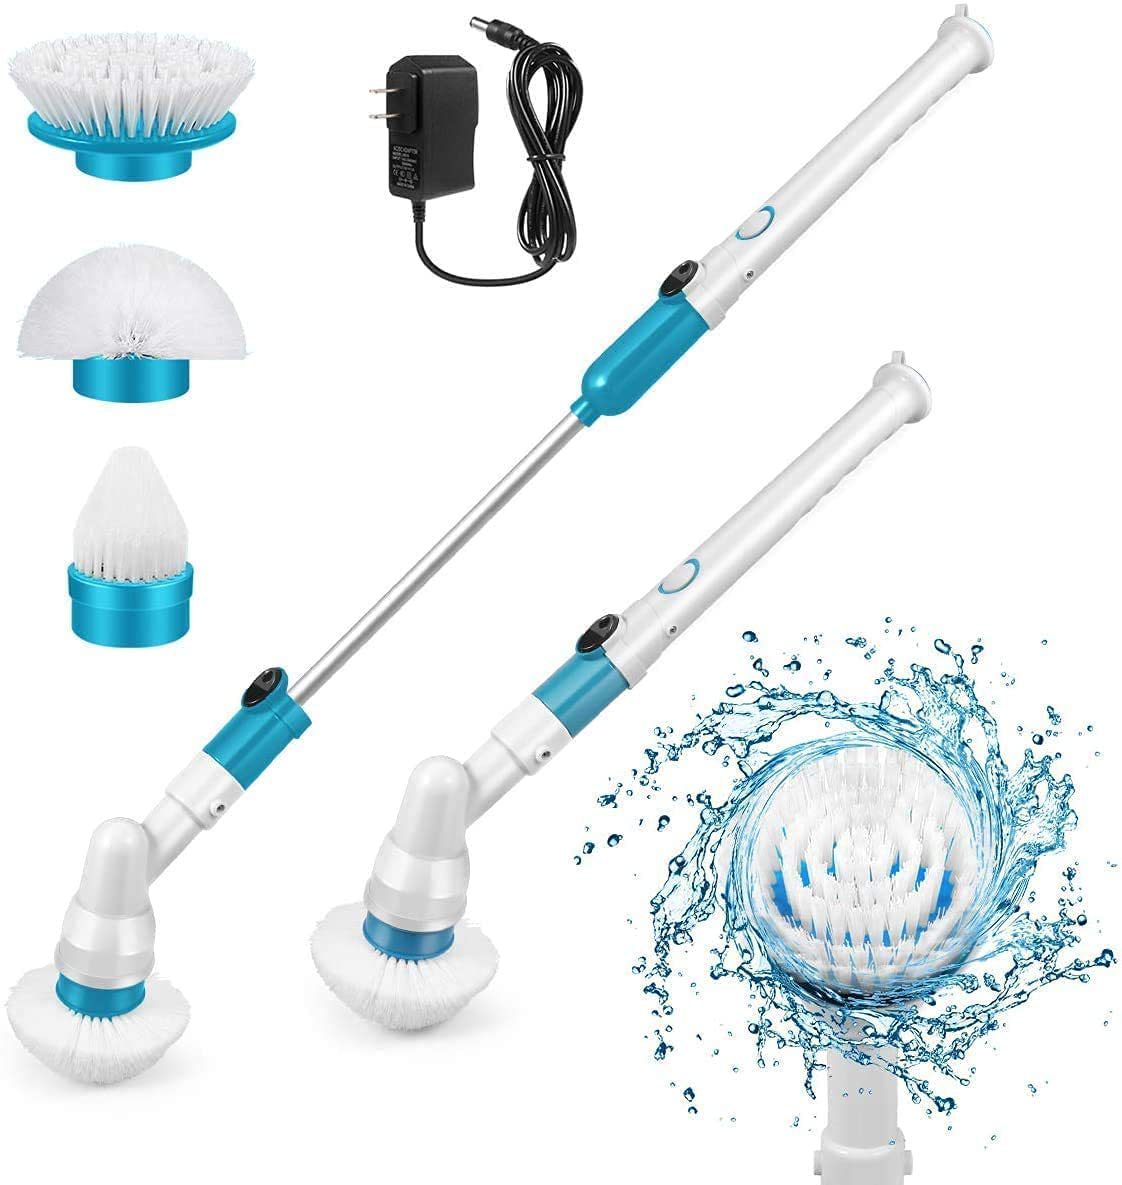 Cross-border wireless multi-function electric cleaning brush hand-held long handle automatic rotation telescopic cleaning bathroom brush floor brush